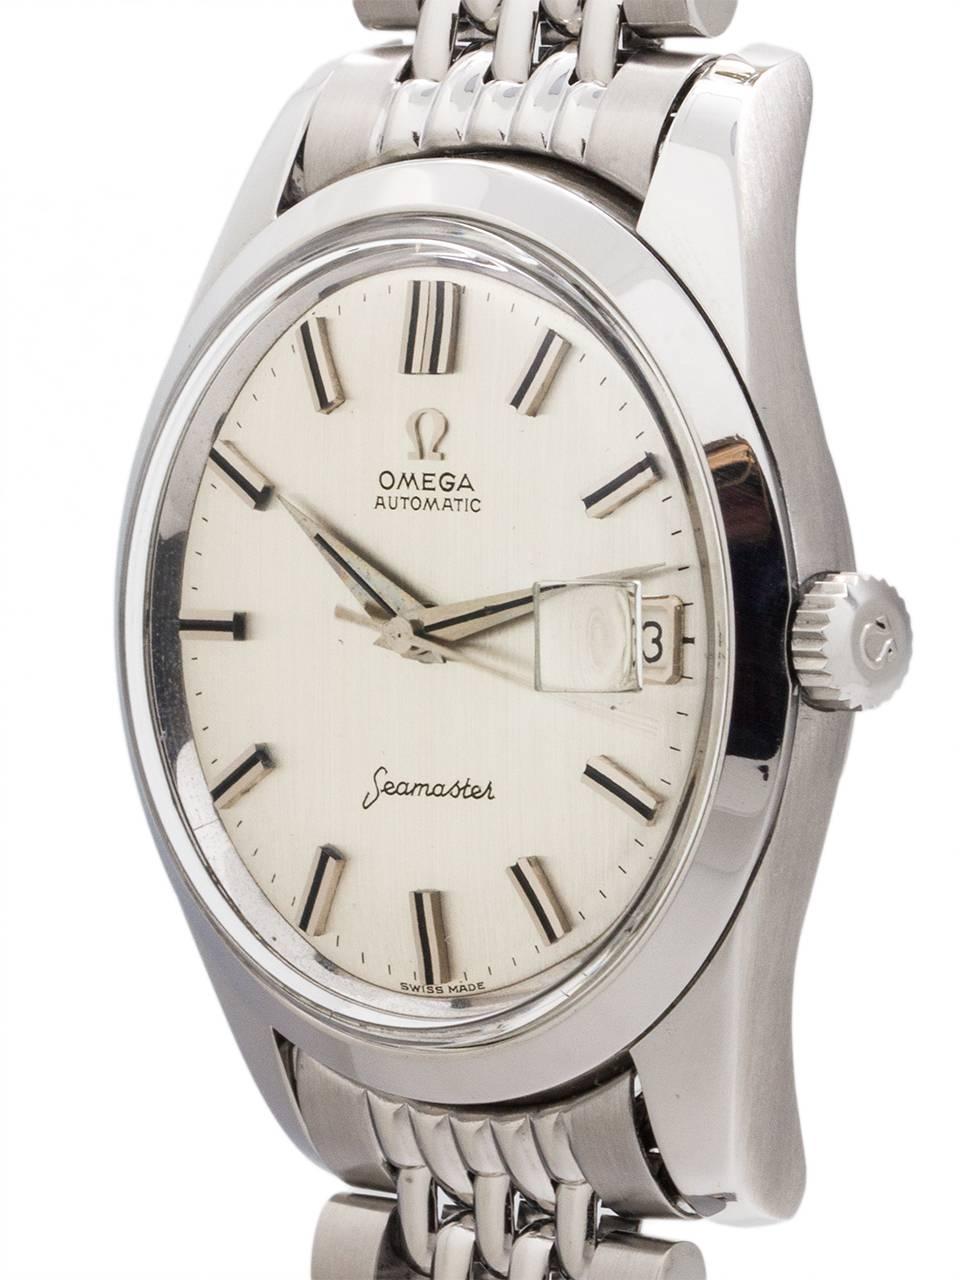 
Omega Seamaster automatic stainless steel ref# 166 010 serial #19 6 million circa 1962. Featuring a robust 35 X 42mm case with screw down back with deeply embossed seamonster logo, heavy design lugs, acrylic crystal, and with very pleasing original